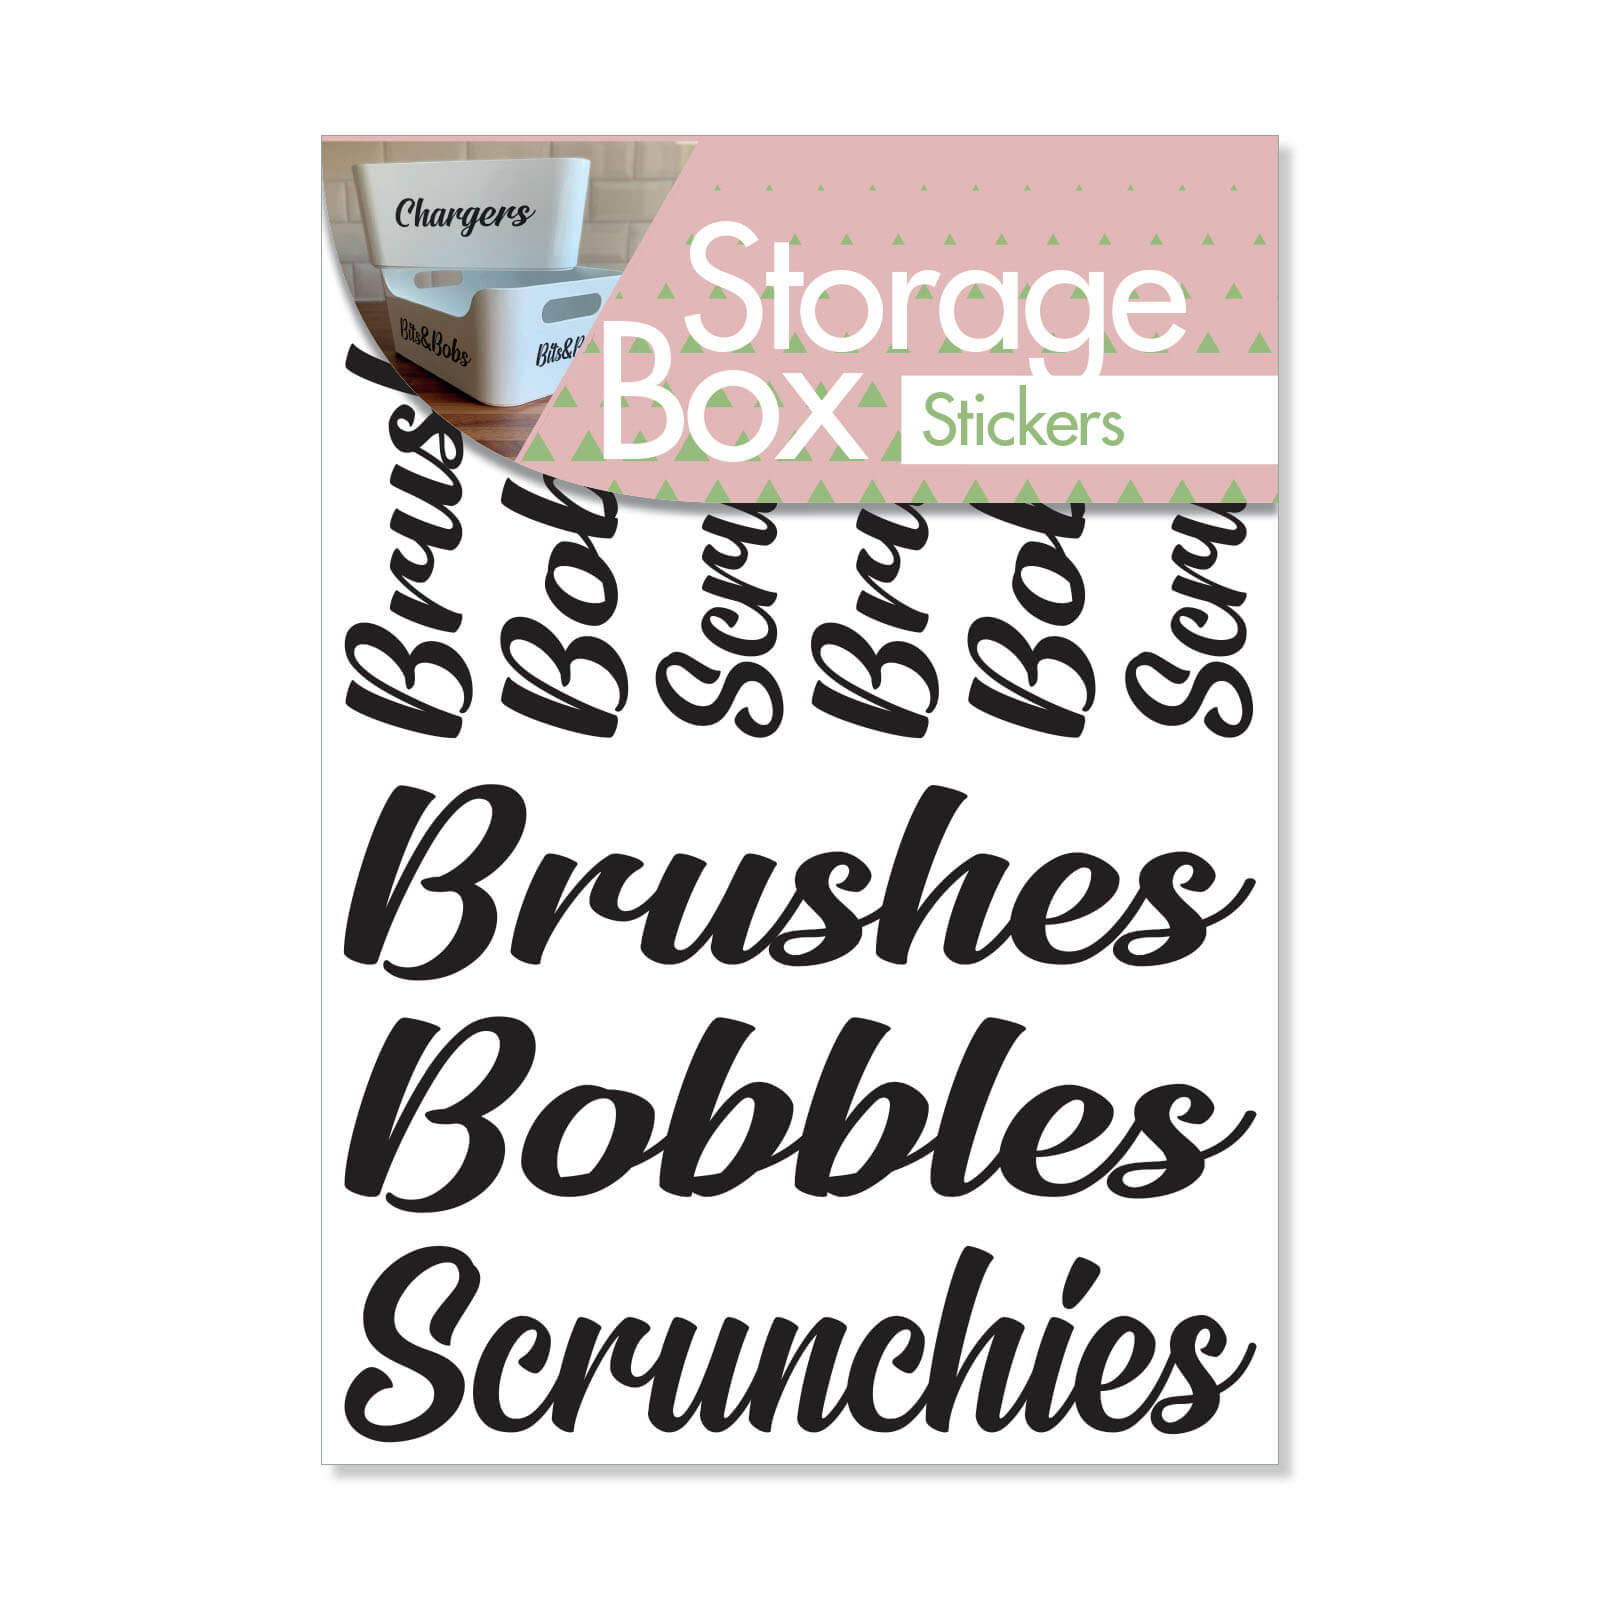 Box Stickers Brushes and Bobbles